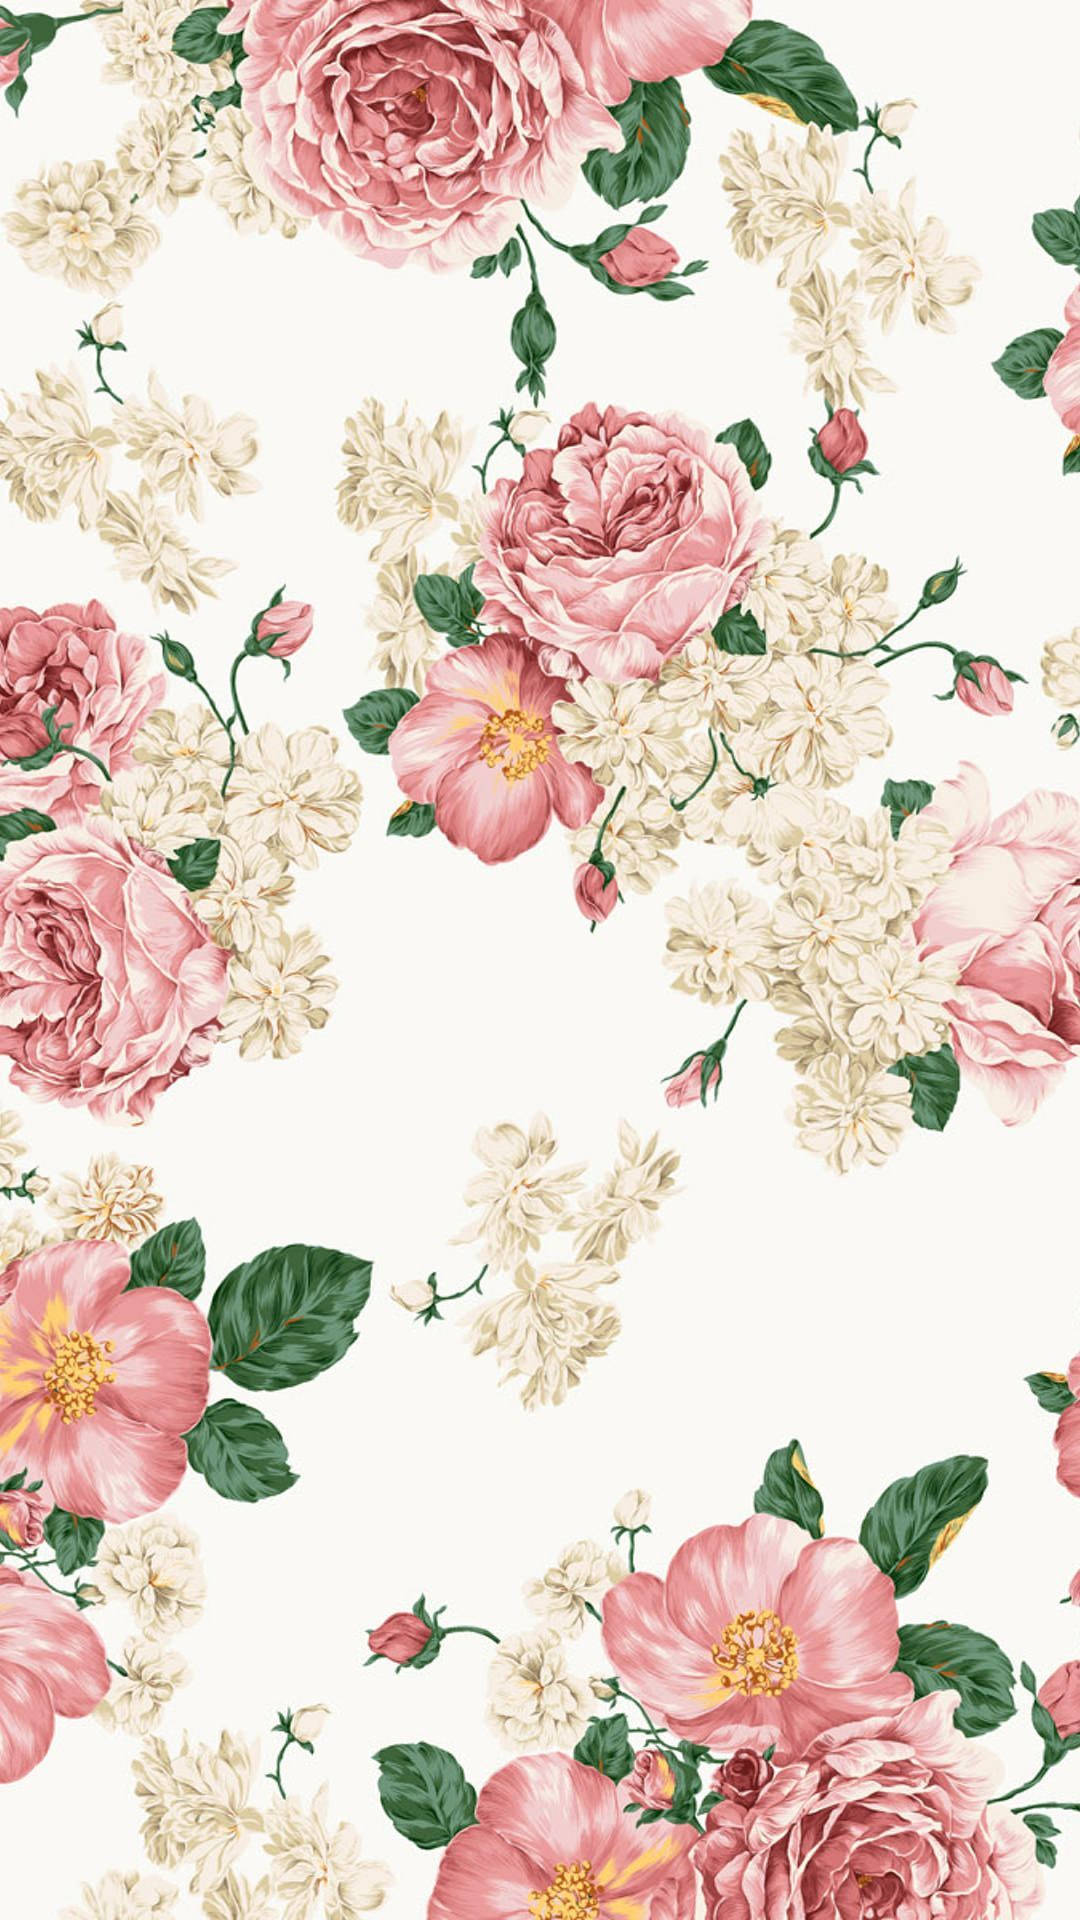 200+] Floral Iphone Wallpapers 